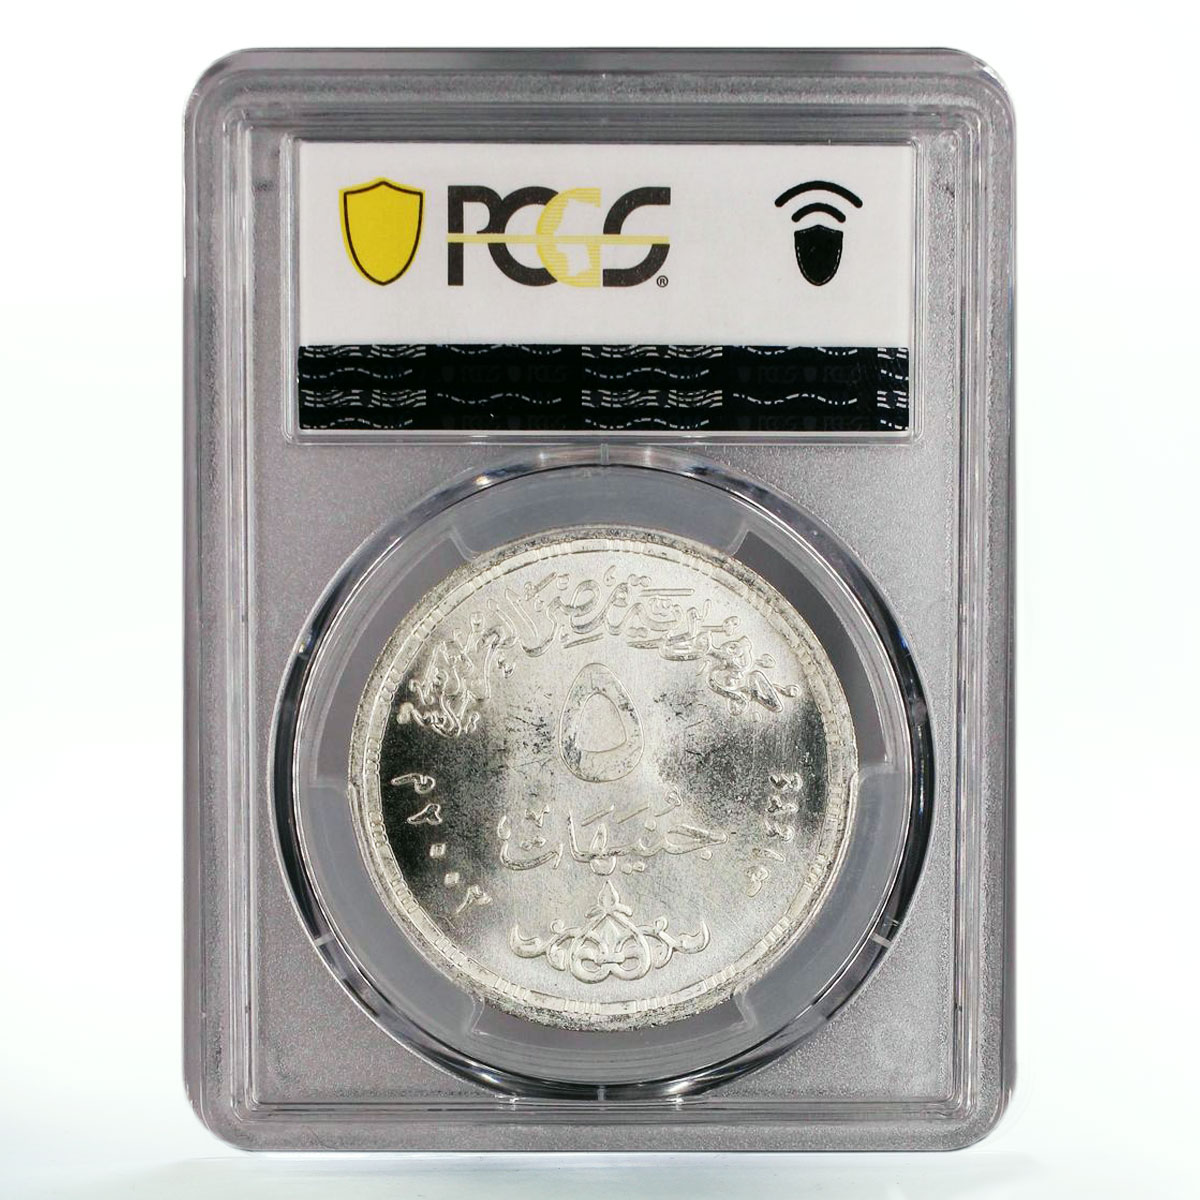 Egypt 5 pounds 100 Years Astronomy Geophysics University MS67 PCGS Ag coin 2003